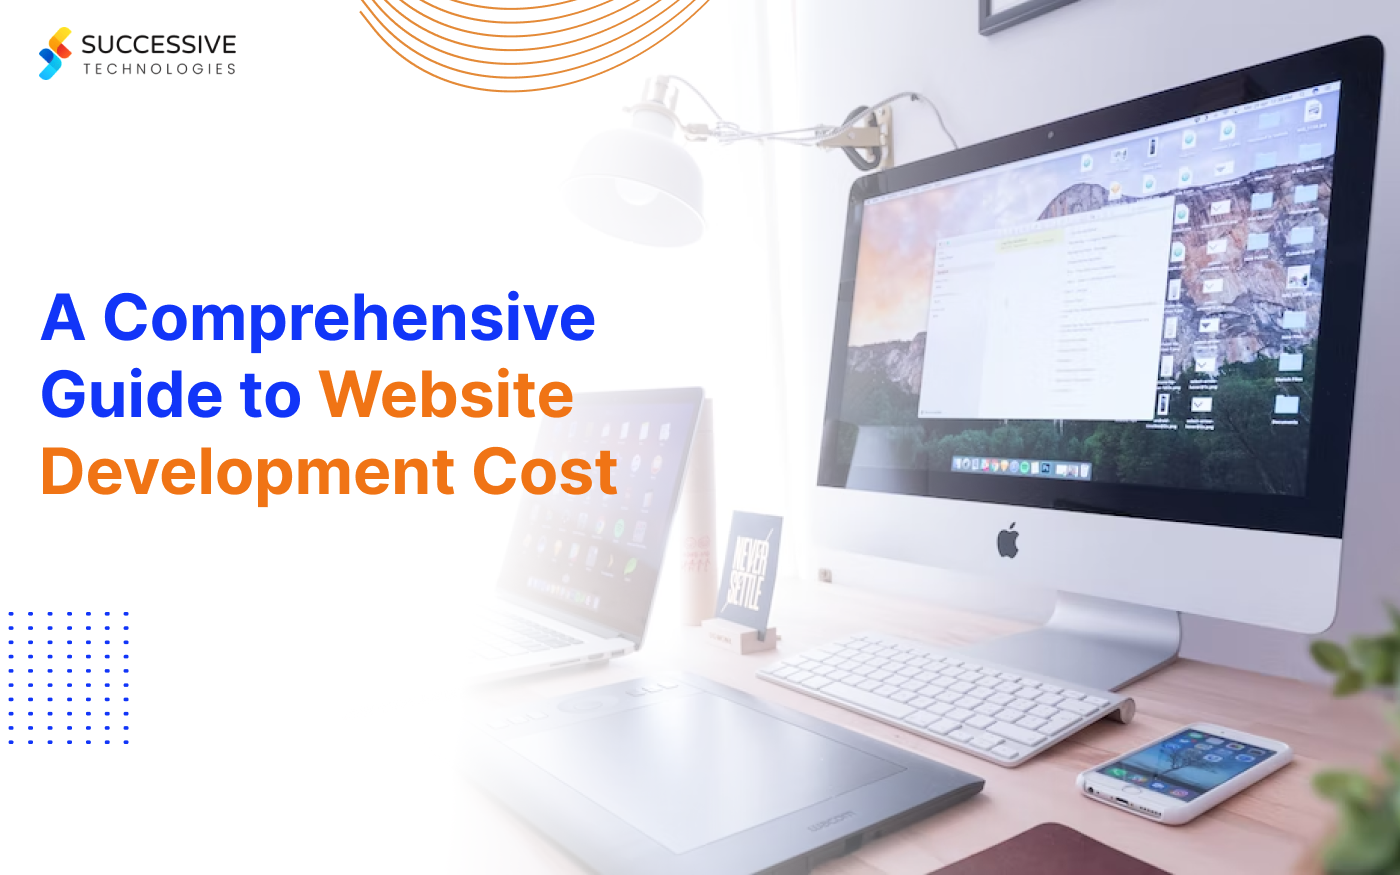 A Comprehensive Guide to Website Development Cost